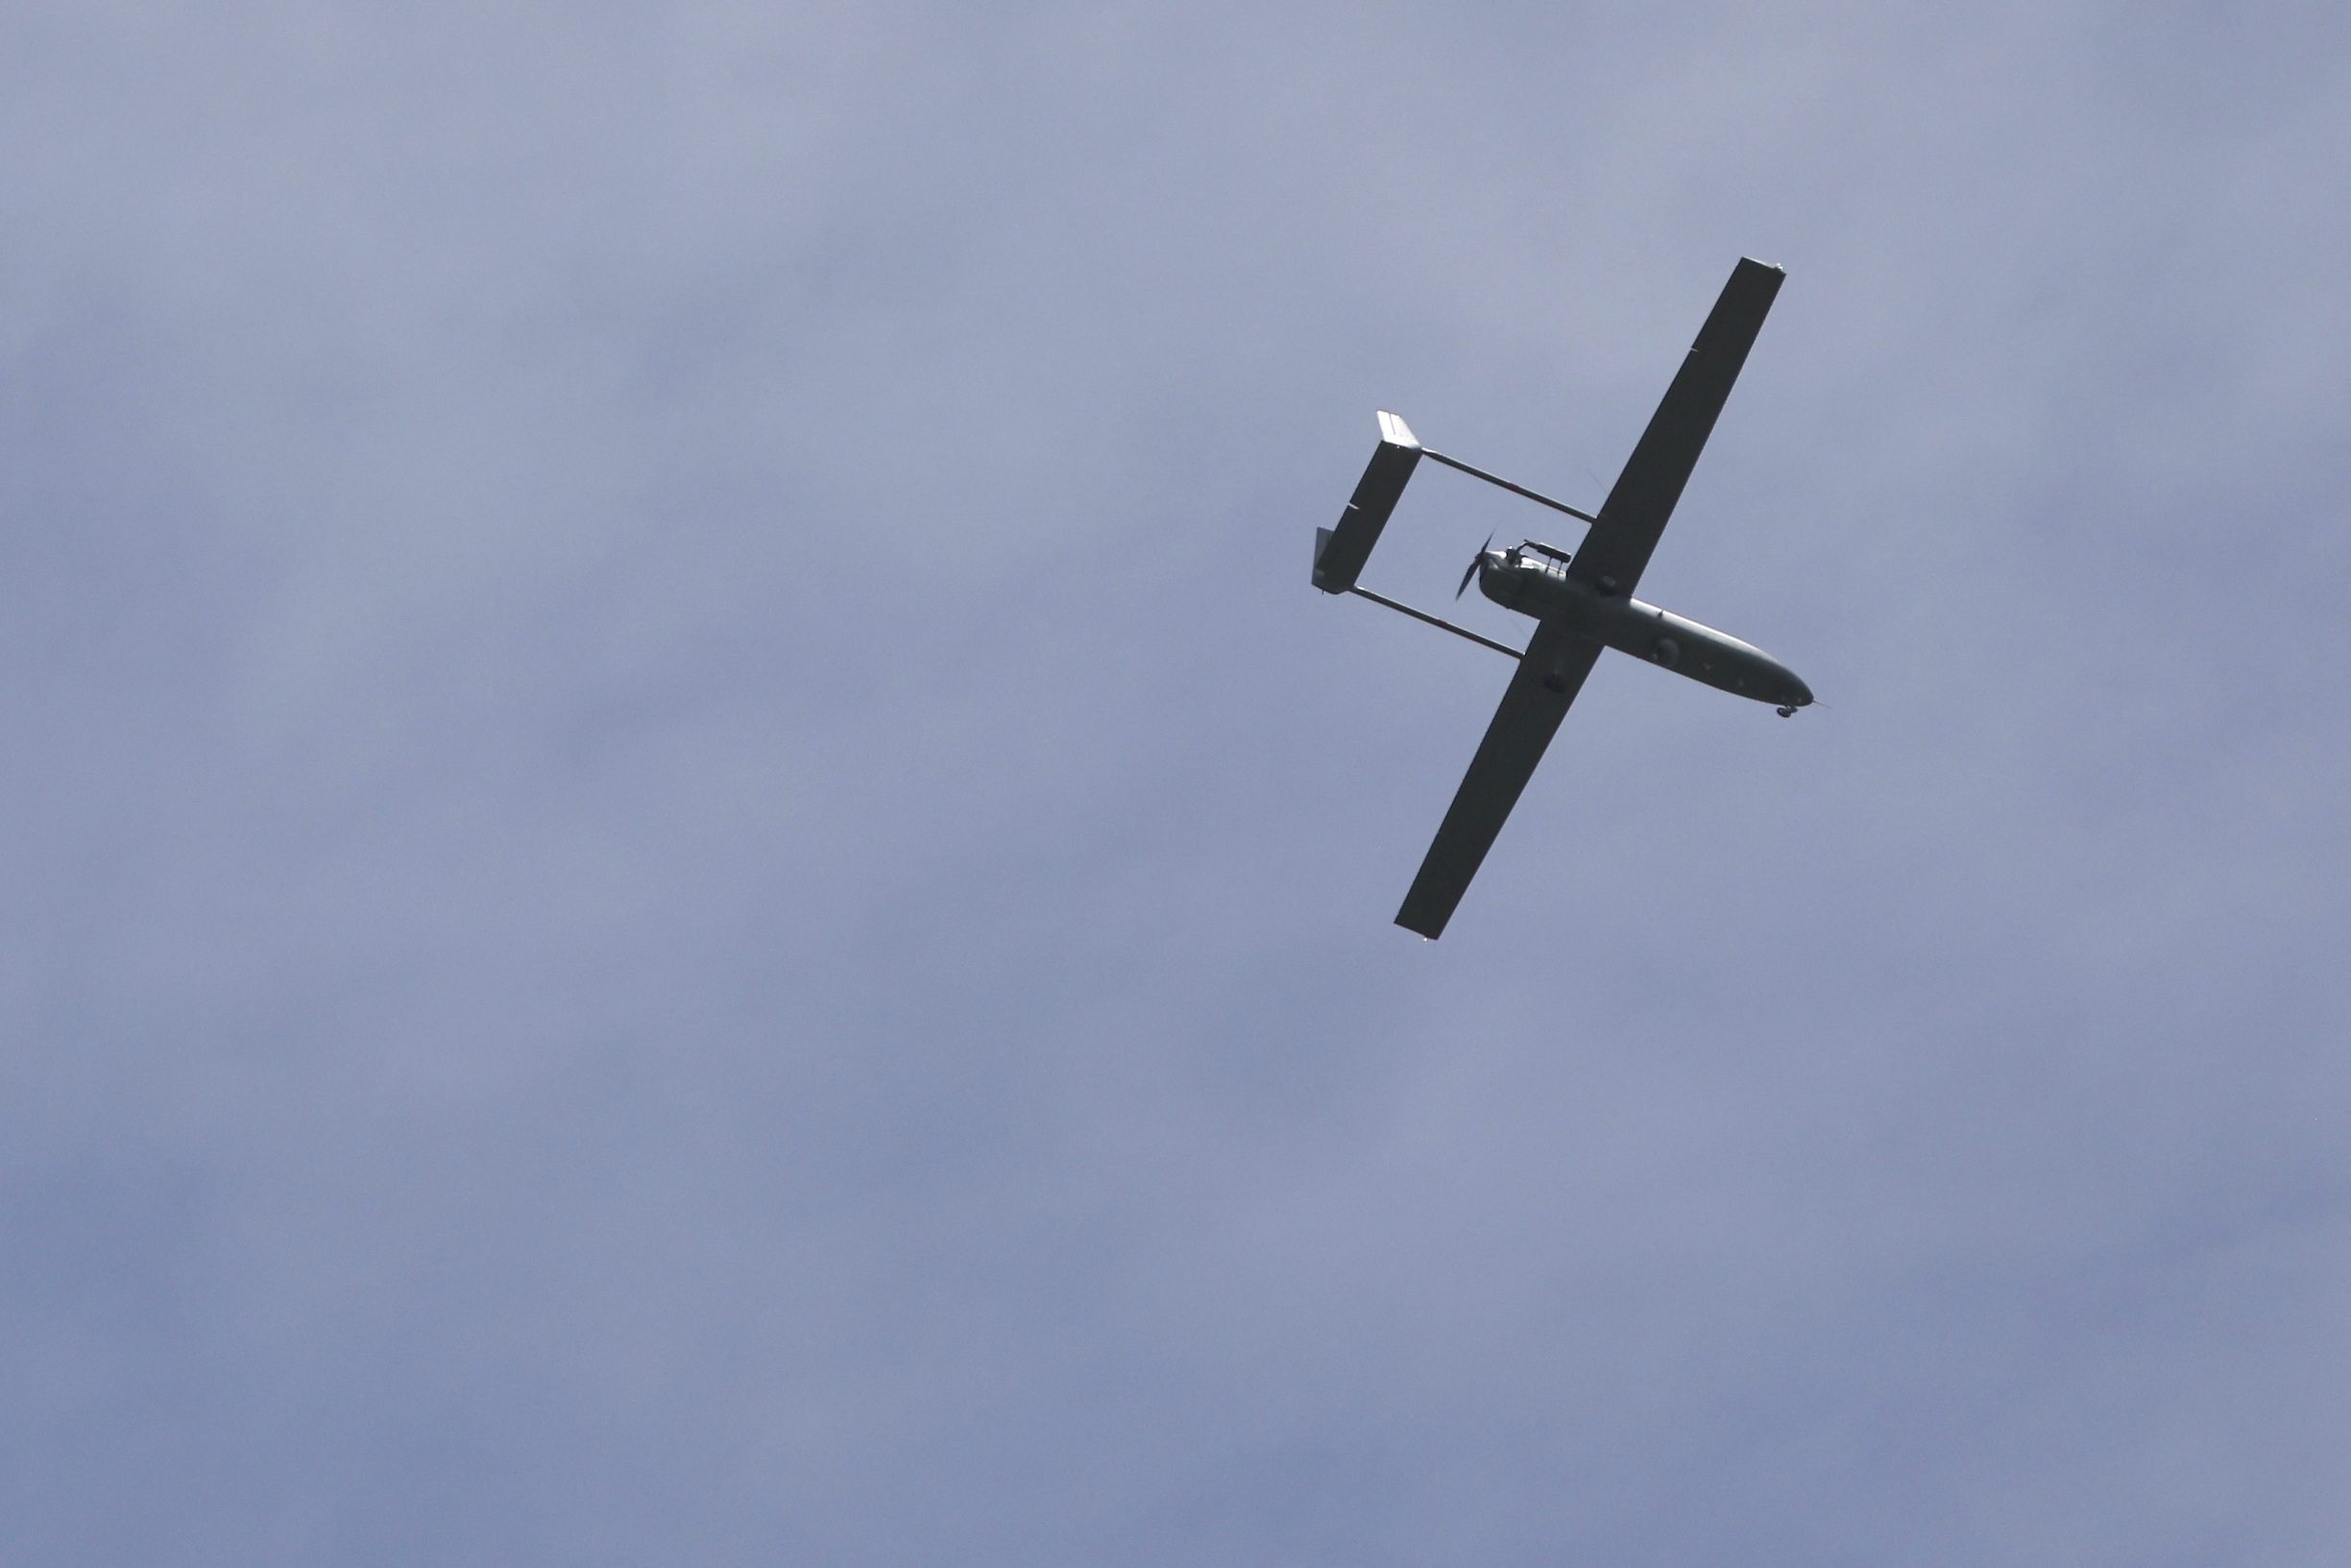 China dismisses Taiwan complaints on drone harassment